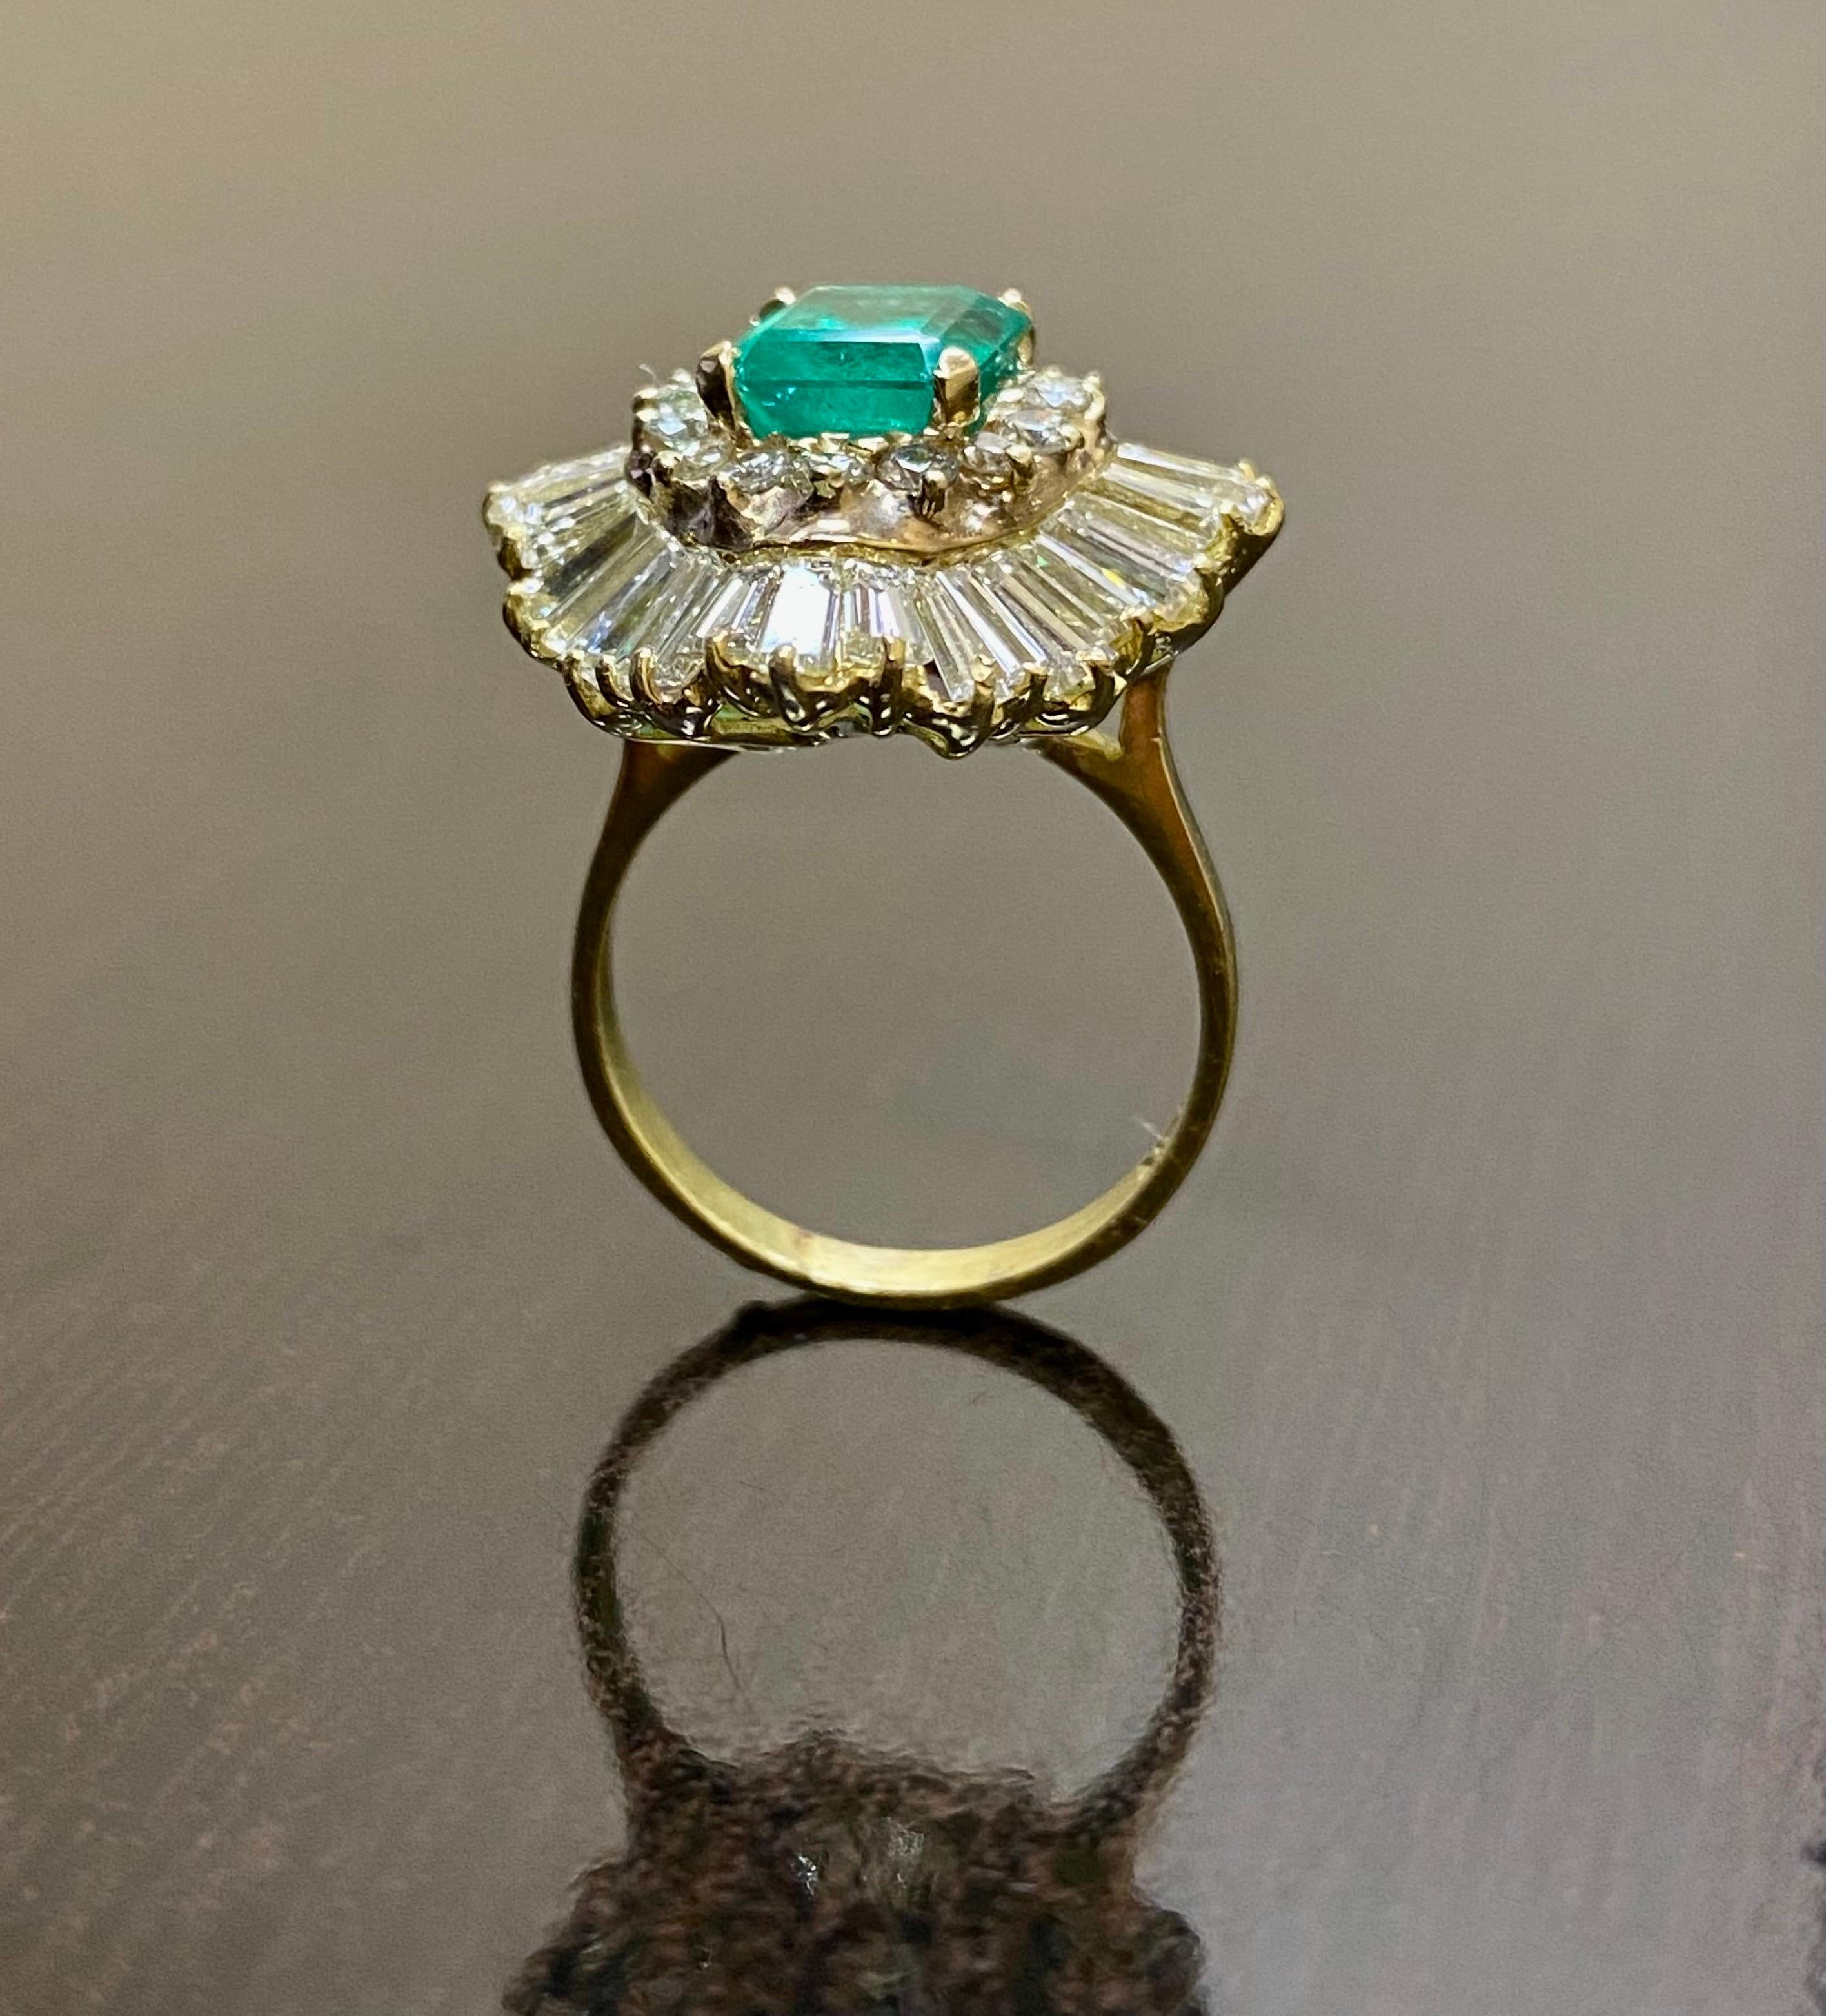 Emerald Cut 18K Yellow Gold Diamond 2.09 Carat GIA Certified F1 Colombian Emerald Ring For Sale